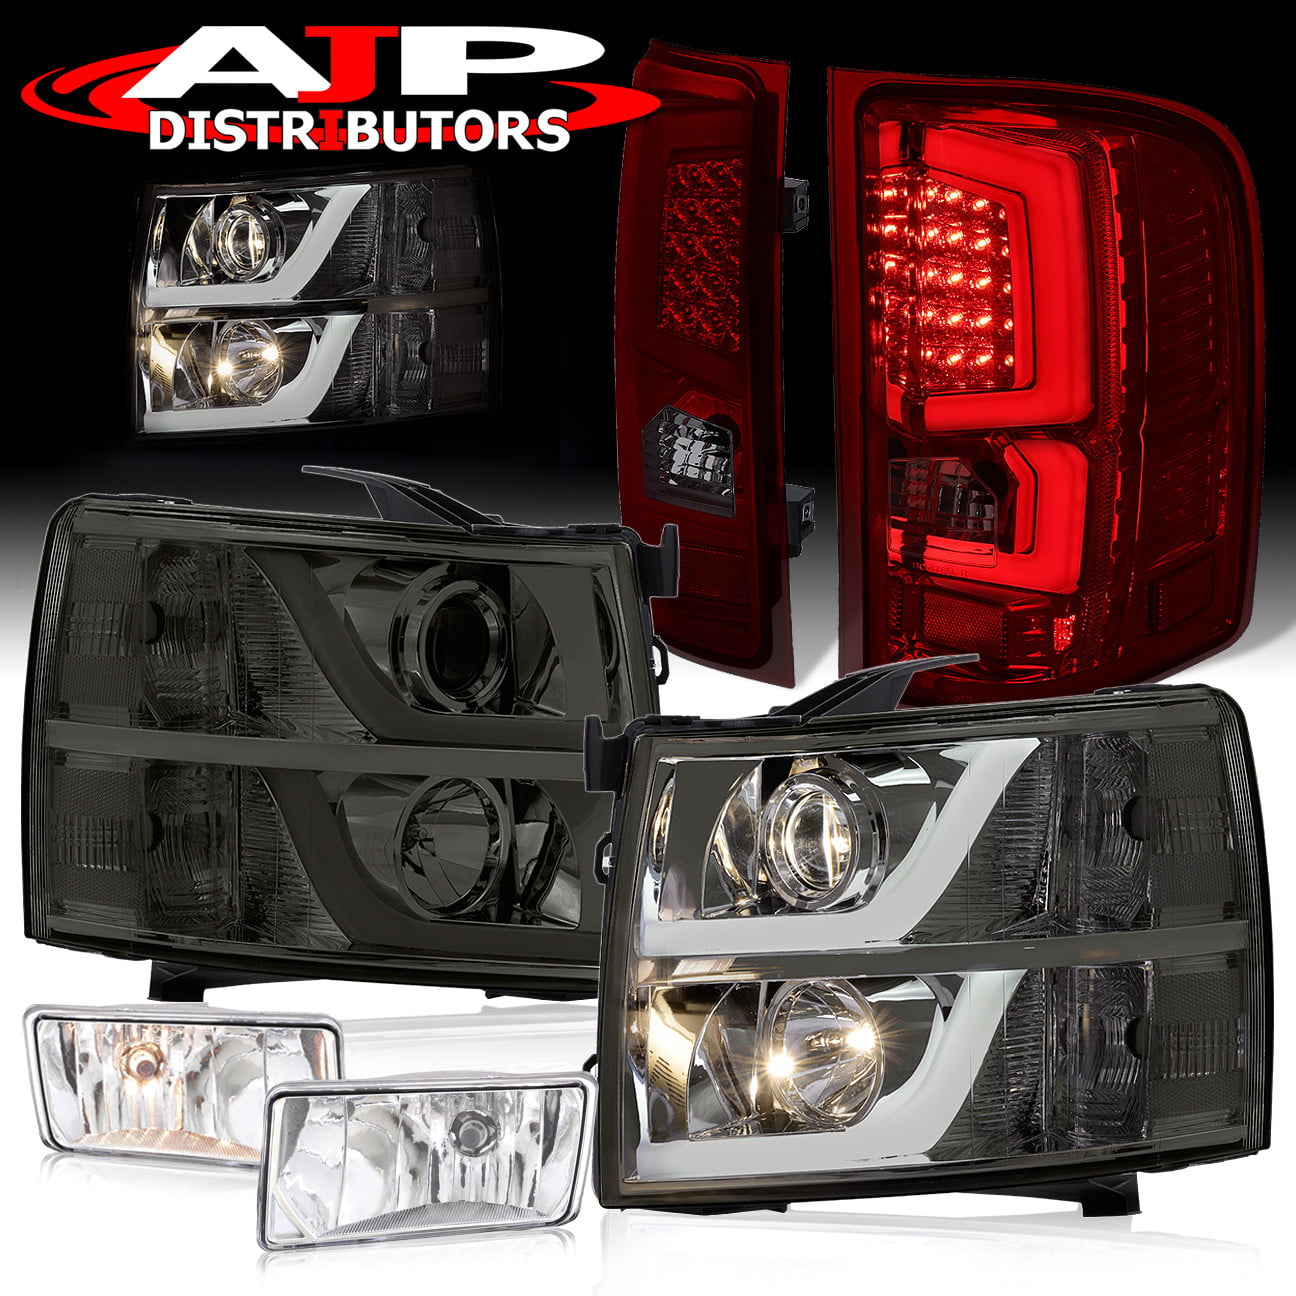 AJP Distributors New Generation Replacement LED C-Streak Tail Lights For Chevy Silverado 2007 2008 2009 2010 2011 2012 2013 07 08 09 10 11 12 13 